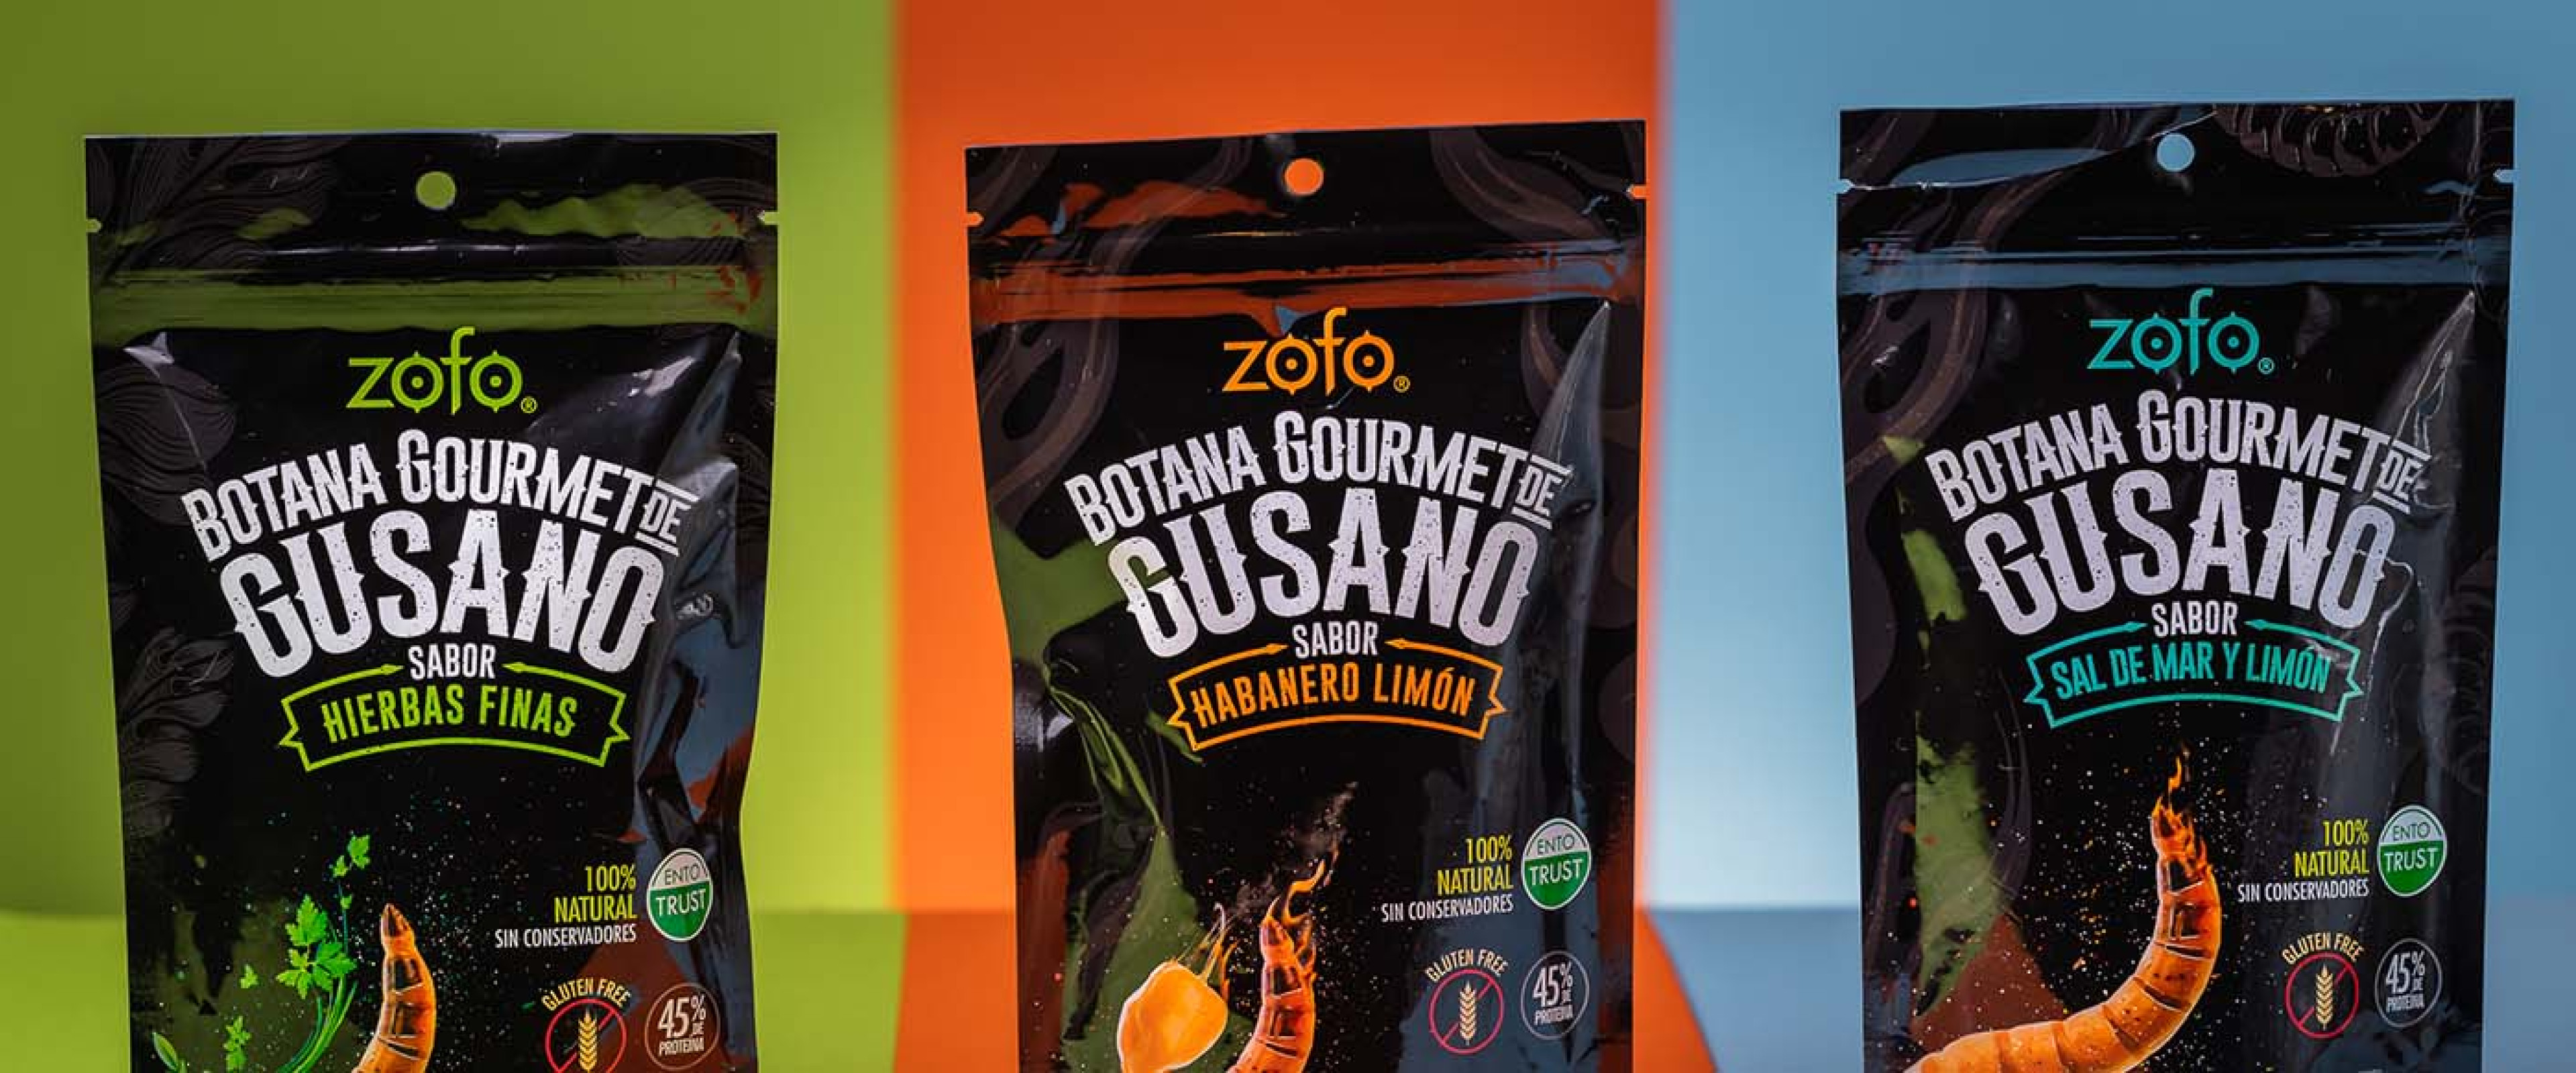 ZOFO, alternate protein snacks are displayed in three different flavors behind green, orange and blue backgrounds. 